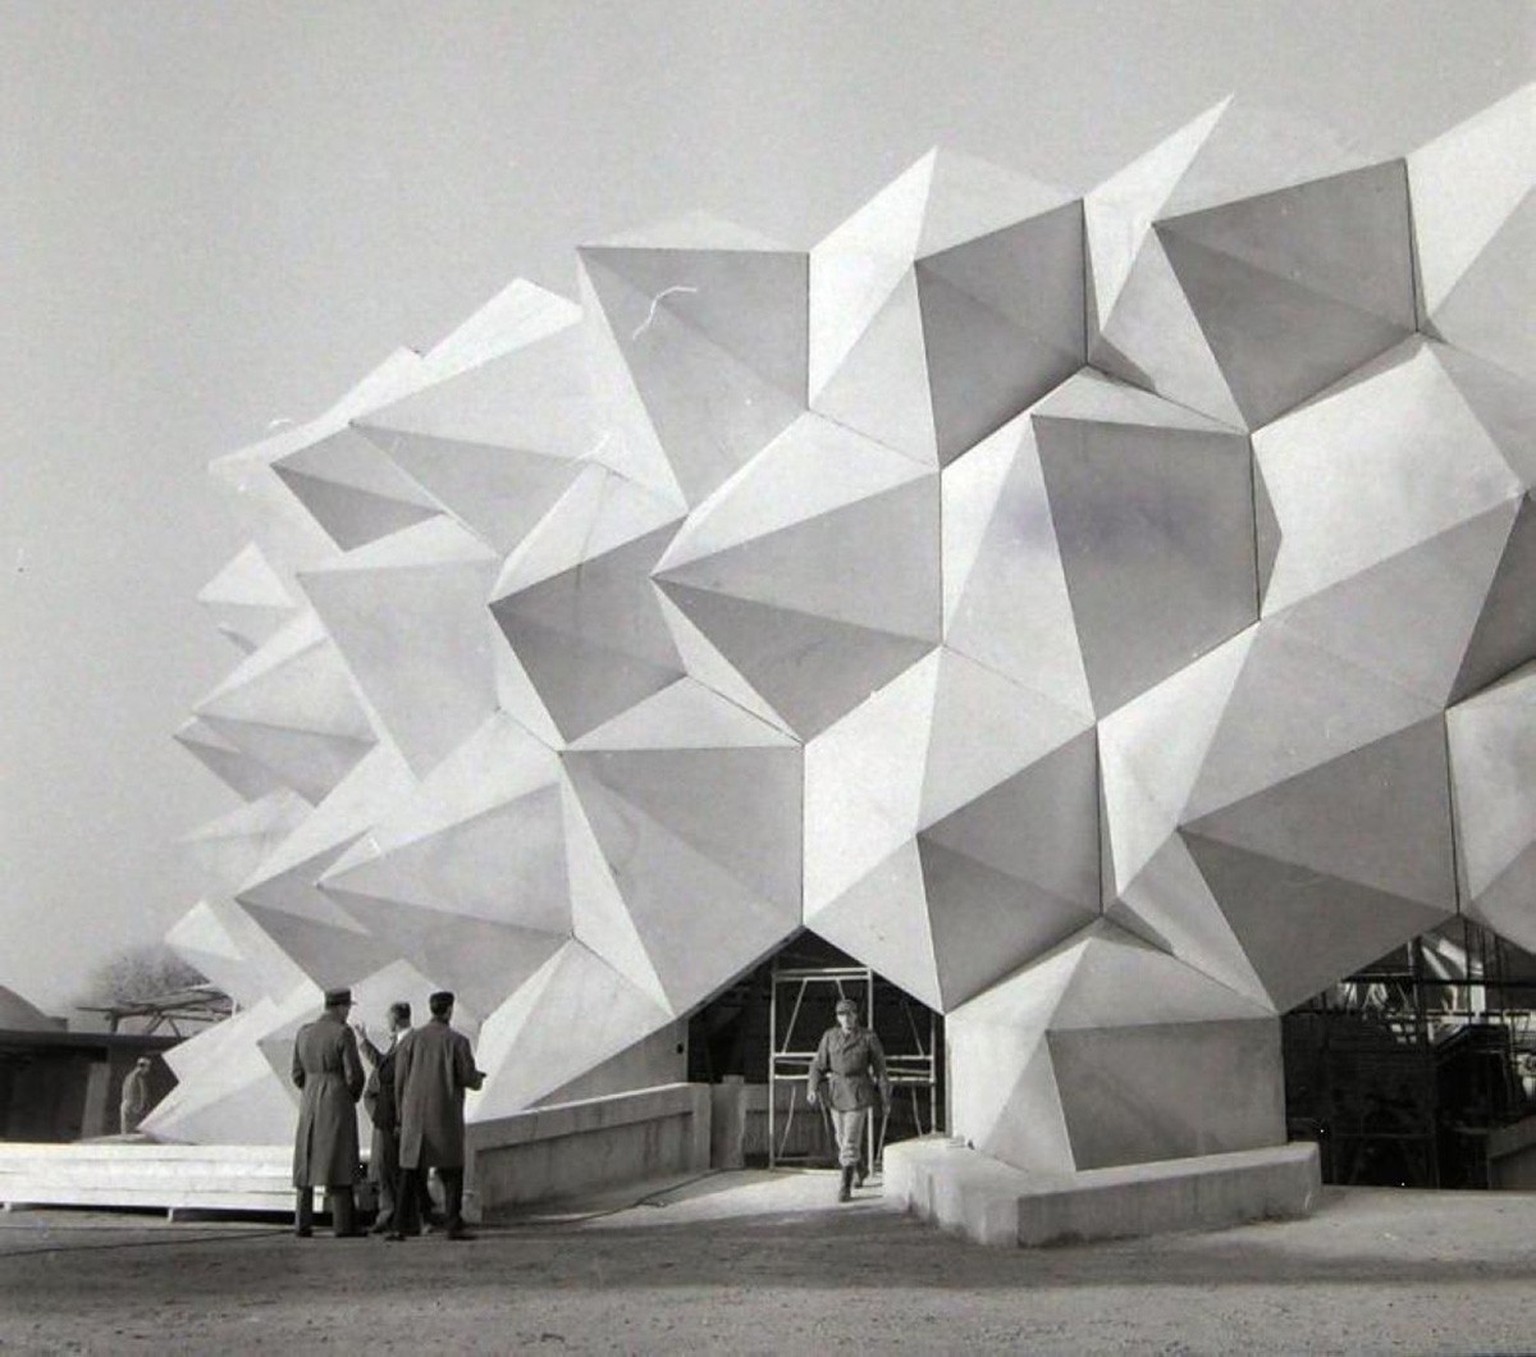 The main pavilion of Expo 64 in Lausanne in the form of a hedgehog: The National Gallery was strongly influenced by the spirit of the Cold War and the spirit of national defense.